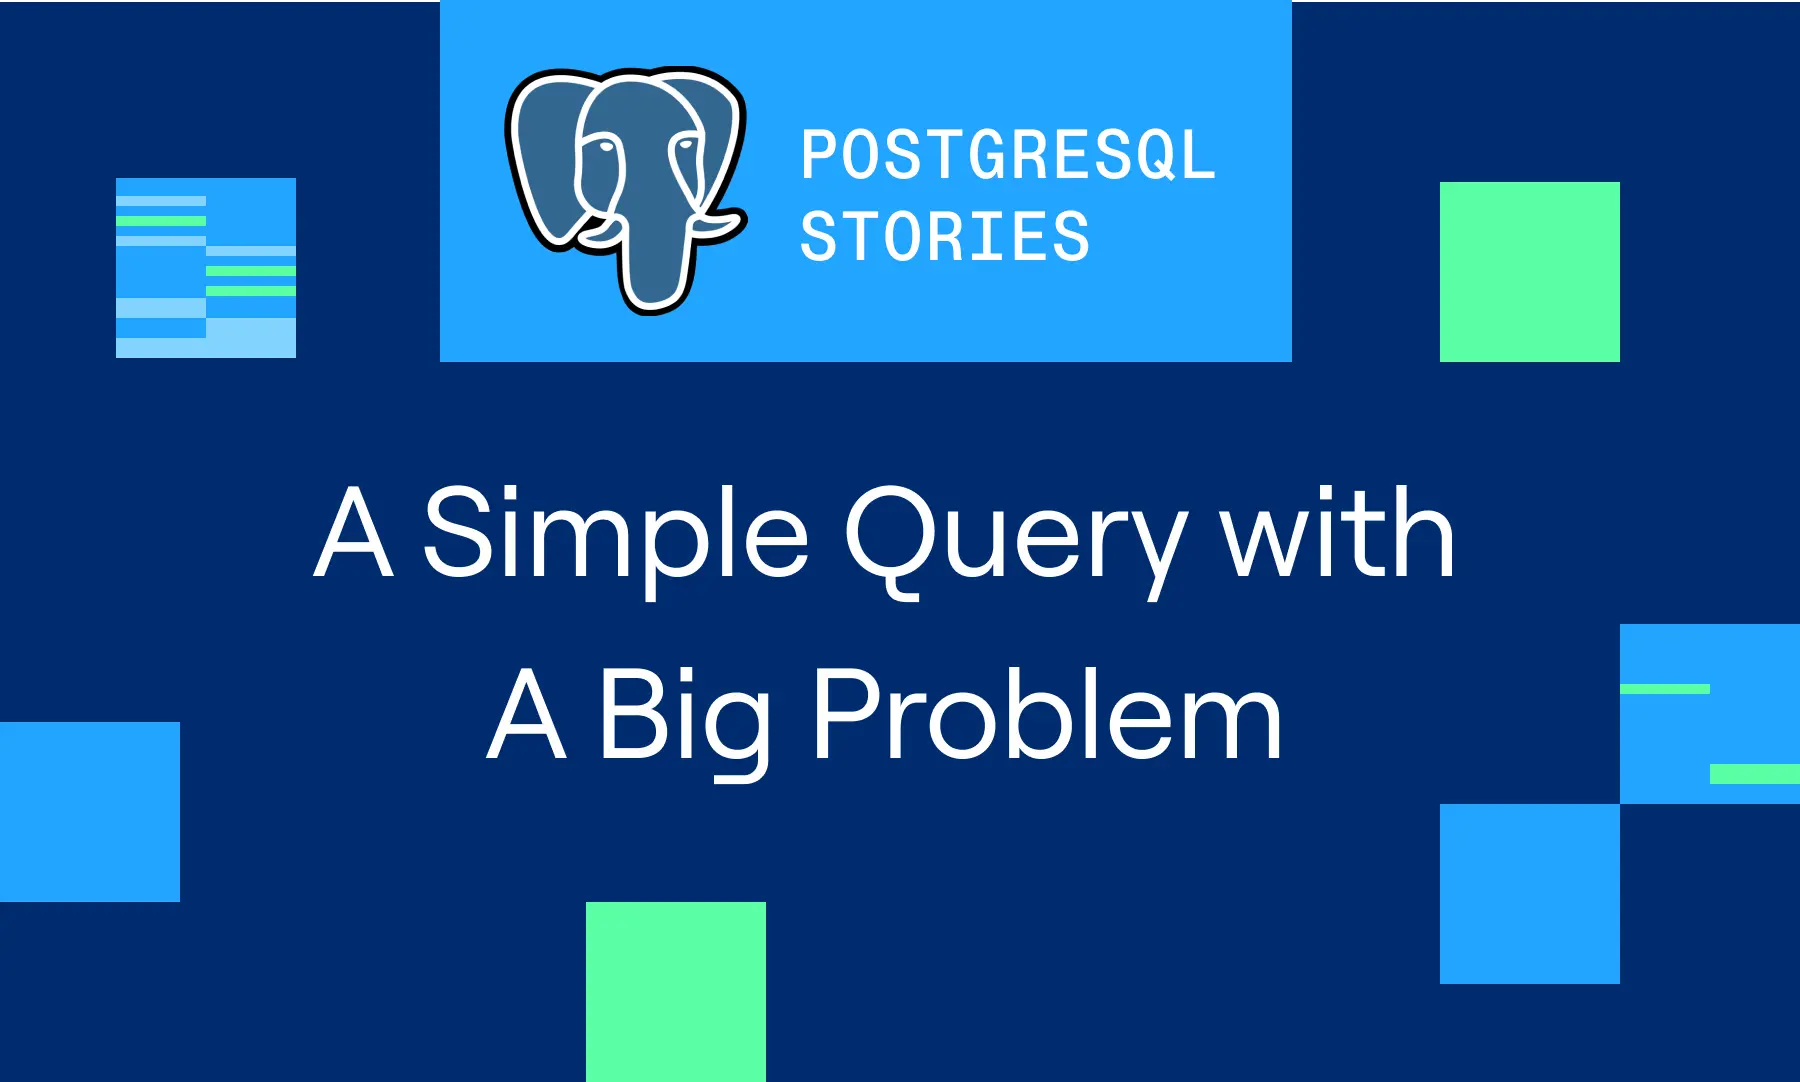 PostgreSQL Stories: A simple query with a big problem